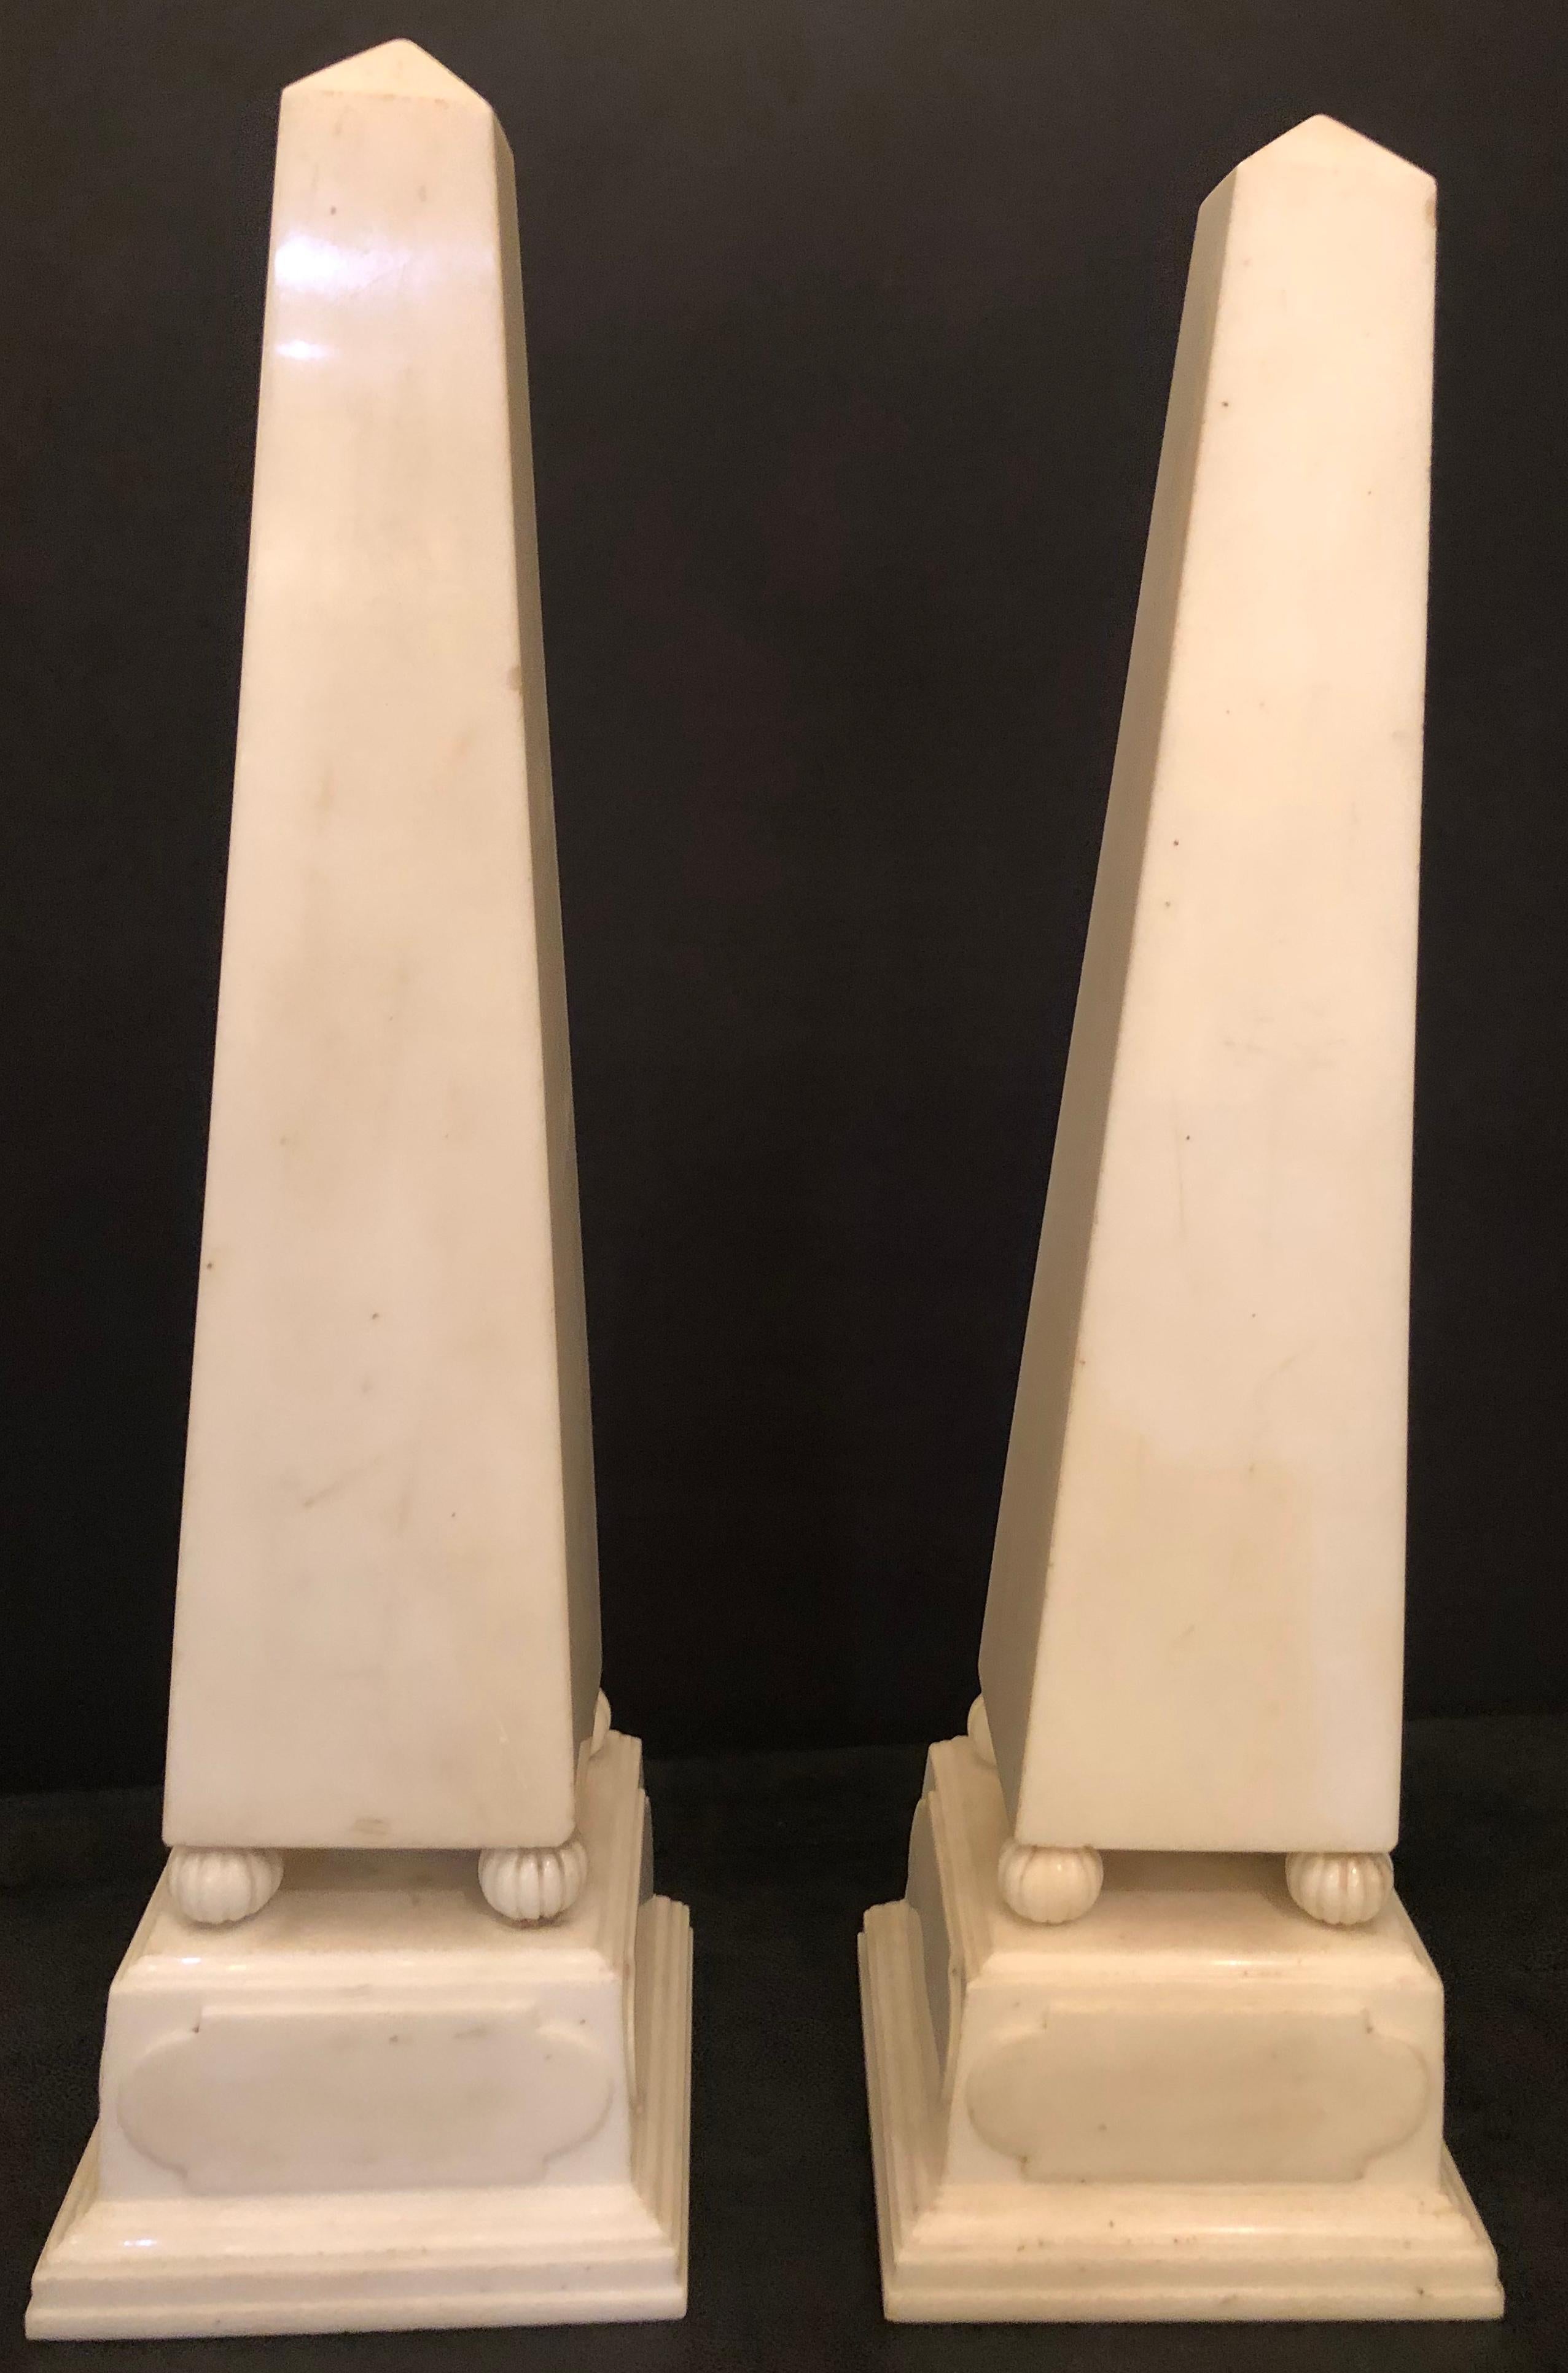 Pair of Palatial antique 19th-20th century solid marble obelisks on pedestals. The obelisks detach from the pedestal bases.